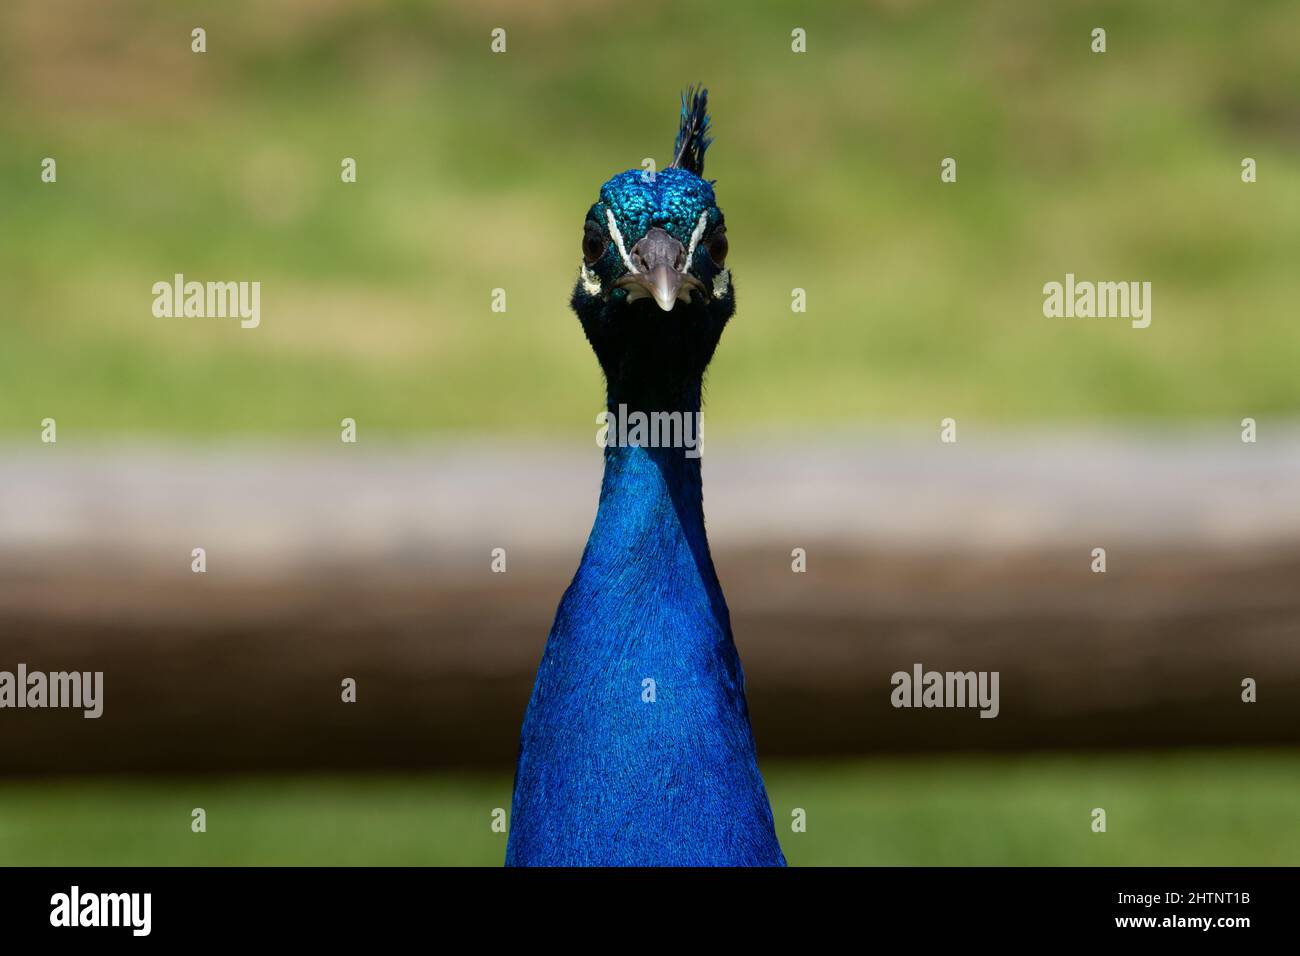 full face of a bright blue male Indian Blue Peacock (Pavo cristatus) with a fallen tree and green grass in the background Stock Photo